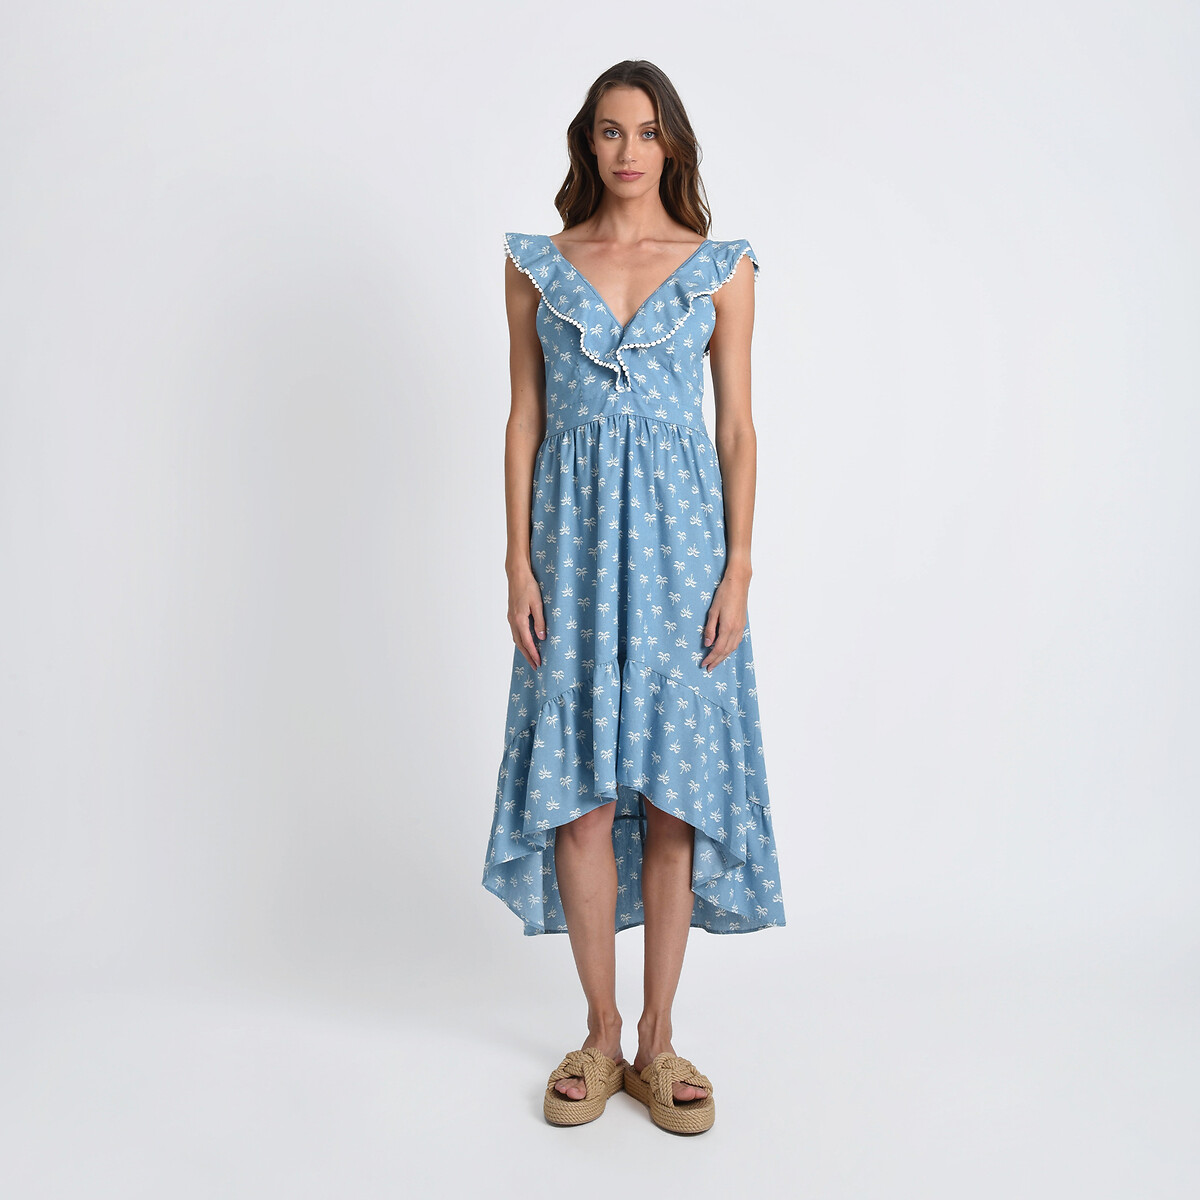 printed cotton mix dress with ruffled neckline